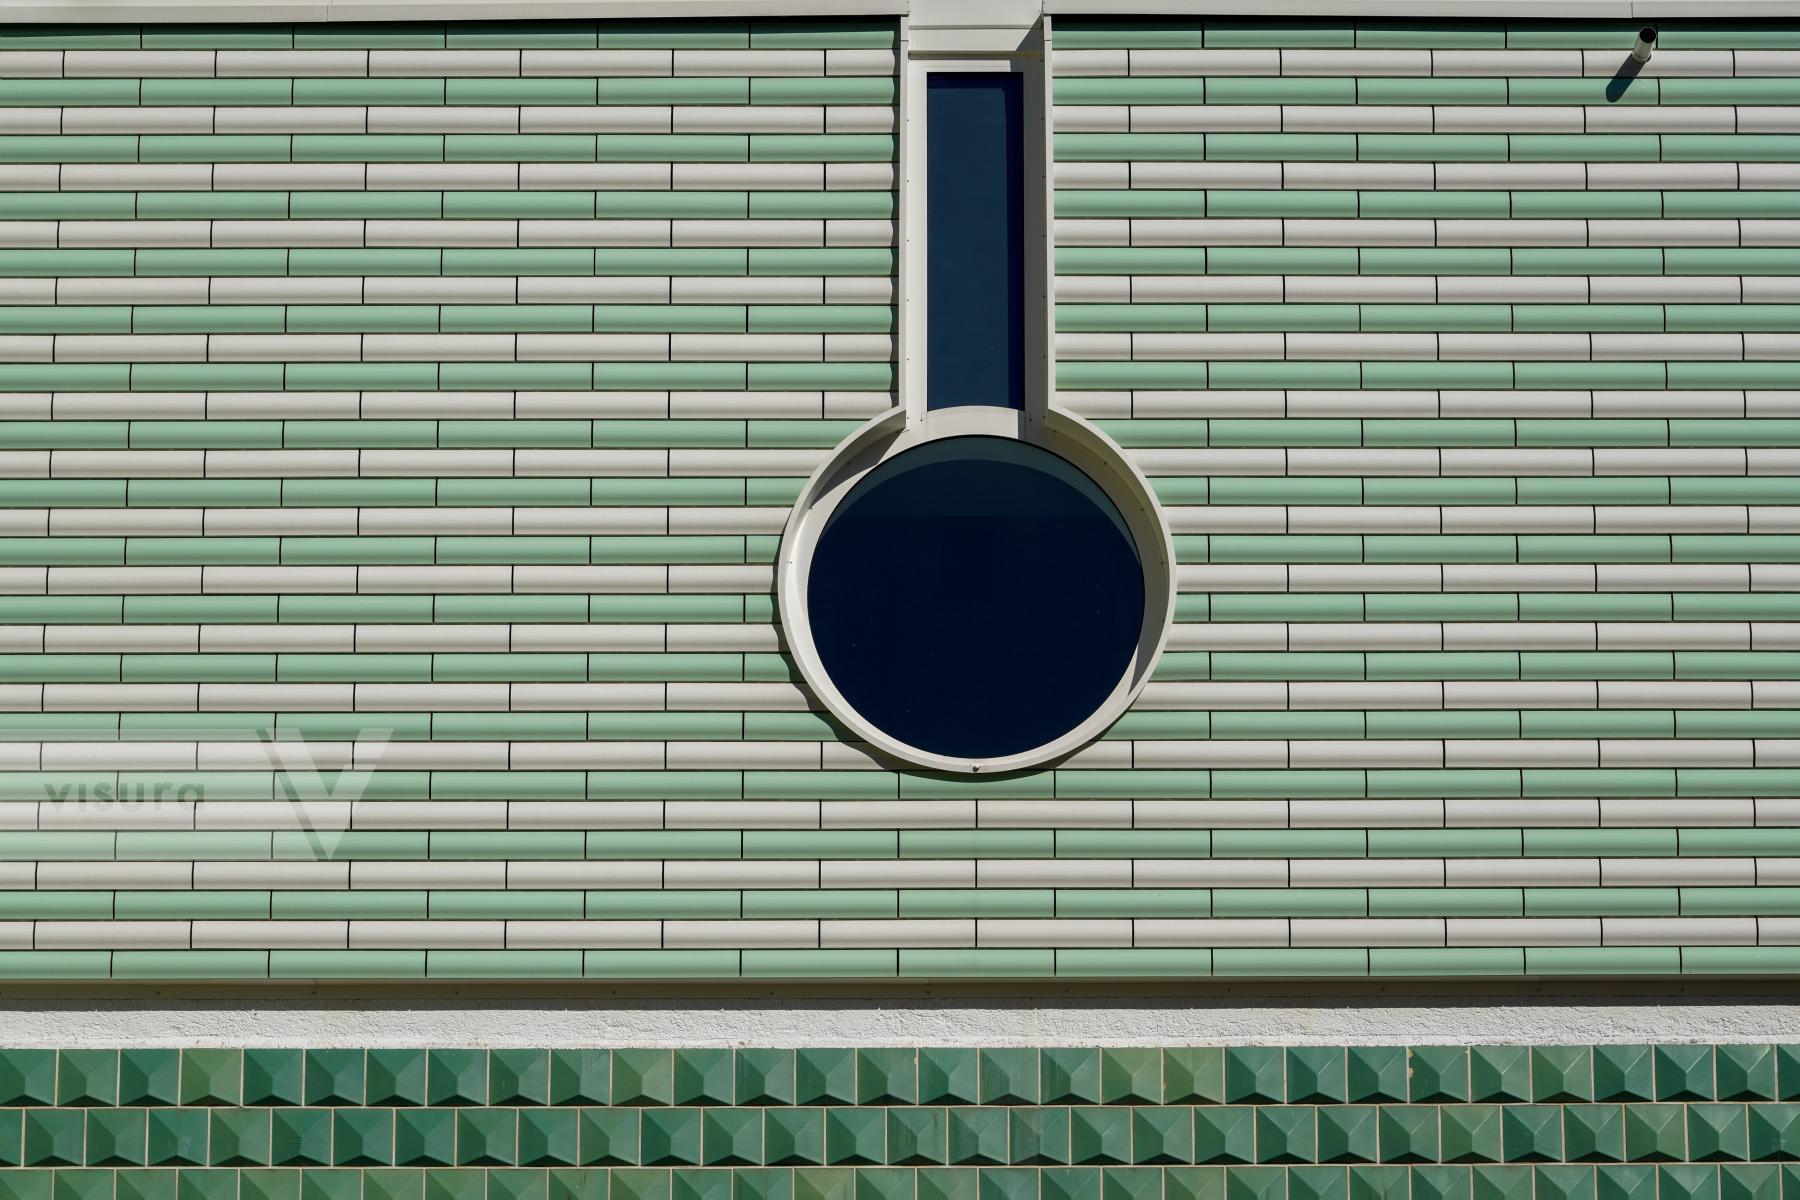 Purchase Geometry in Harmony: Circular Window on Tiled Facade by Michael Nguyen